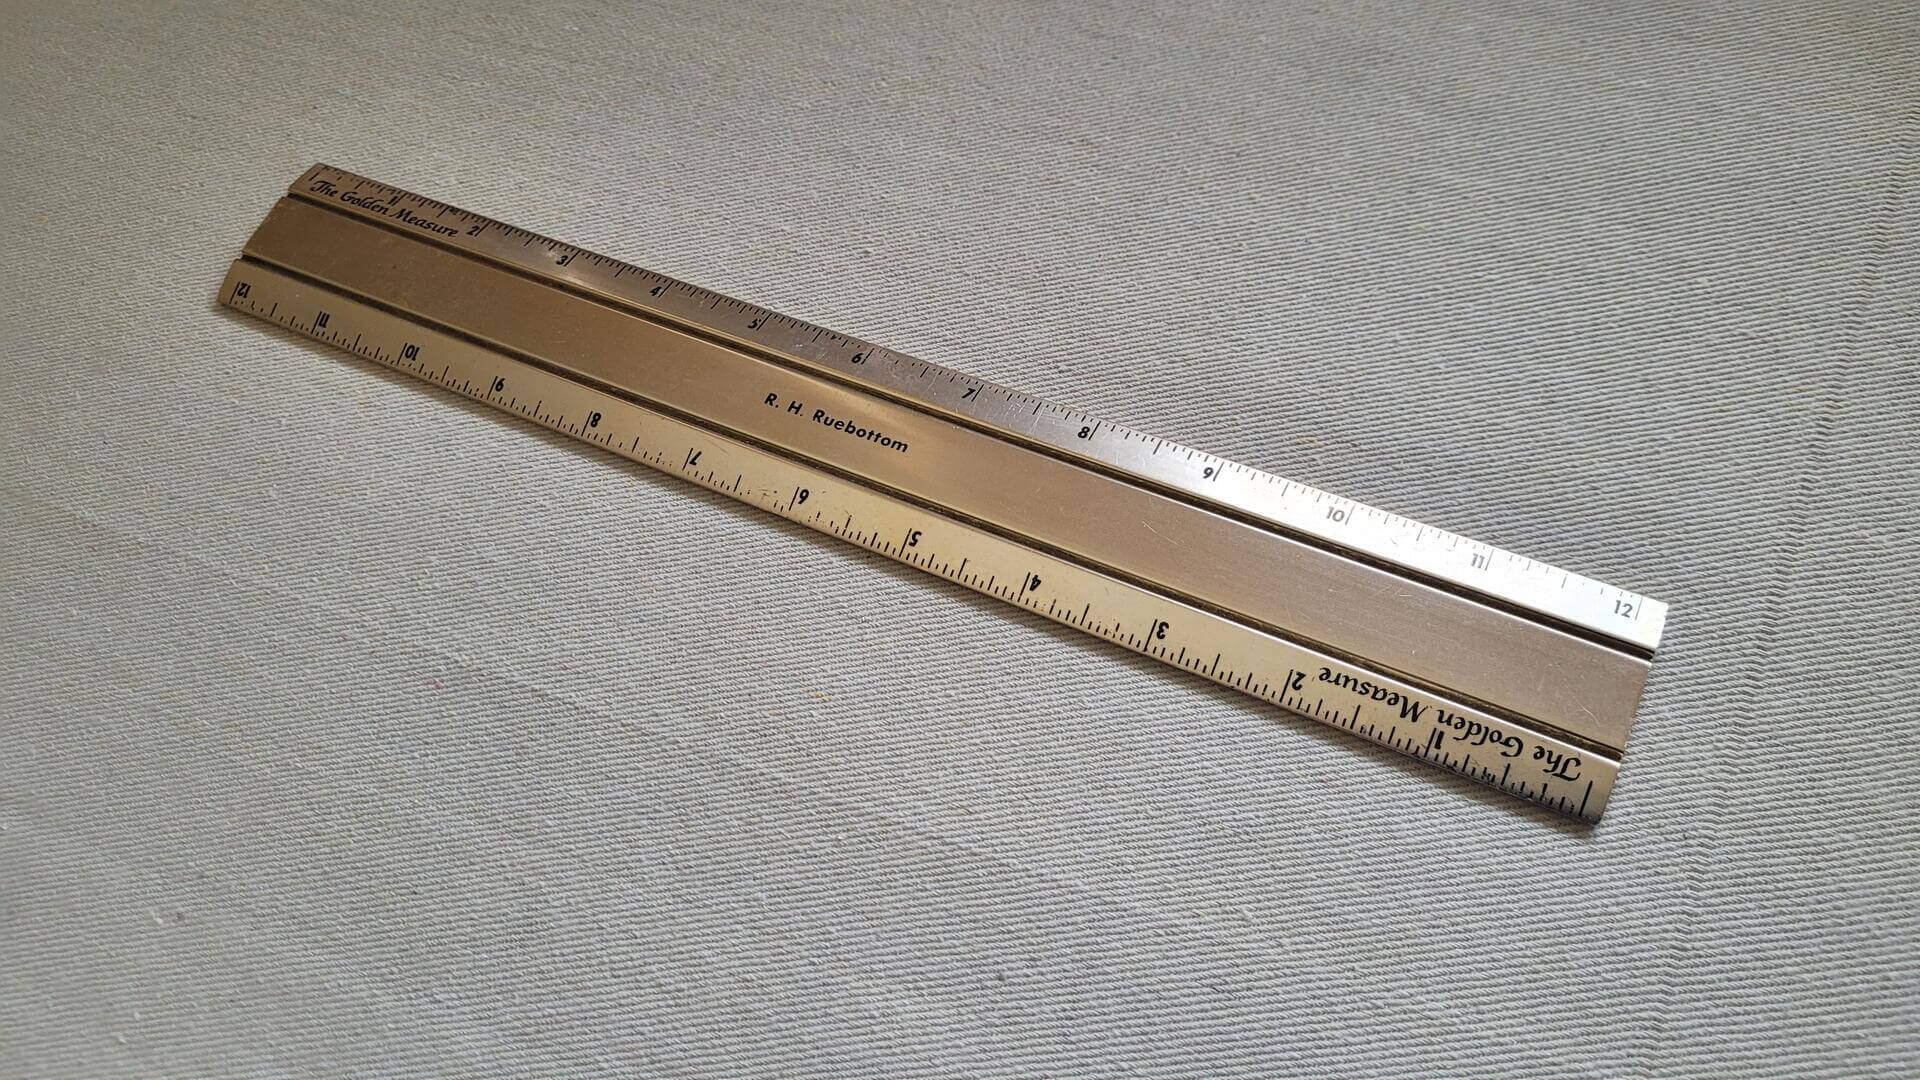 1960s retro 'The Golden Measure' 12 inches advertising ruler made for Belyea Bros. Limited Golden Jubilee 1910-1960. The Company started in 1908 as a plumbing and heating company and they are the holders of the first plumbing and heating license issued in the City of Toronto, PH1